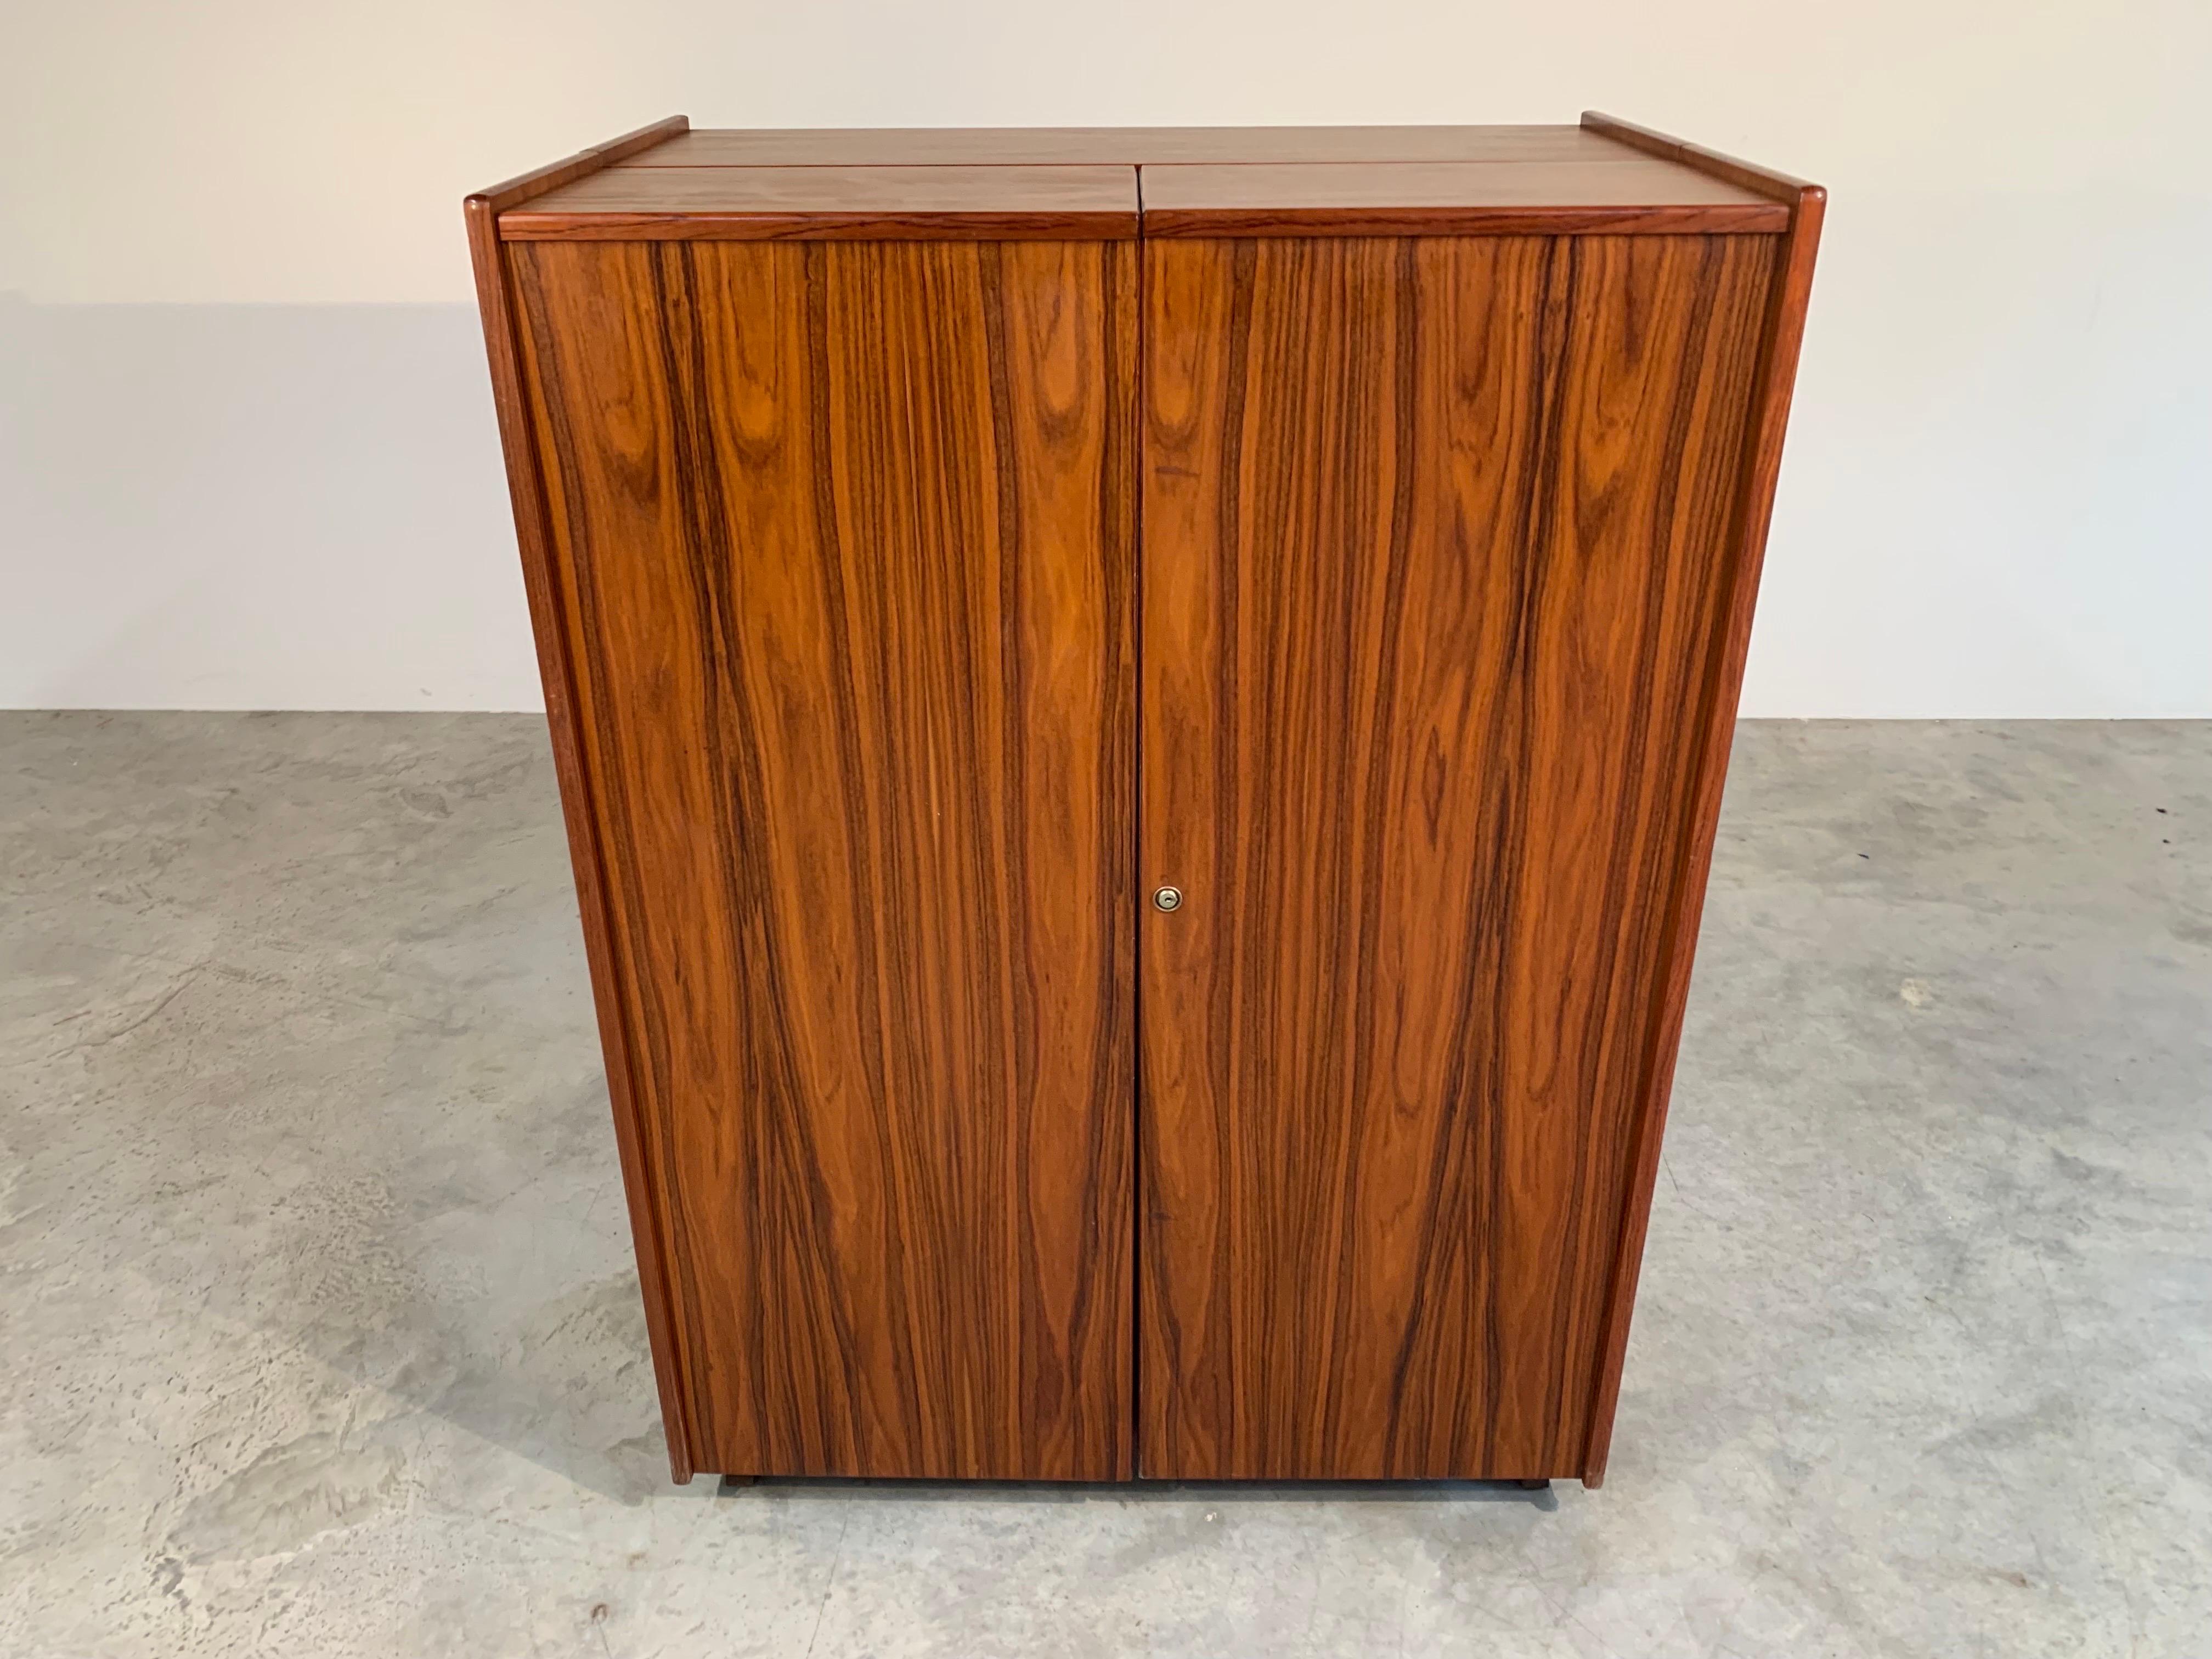 This “magic box” folding desk was originally designed in 1928 by Swiss architects Mummenthaler and Meier. 
 The desk opens up to reveal several storage cubbies along with a rosewood desk surface that opens up to 55.25” Wide and 18.75” Deep. Over